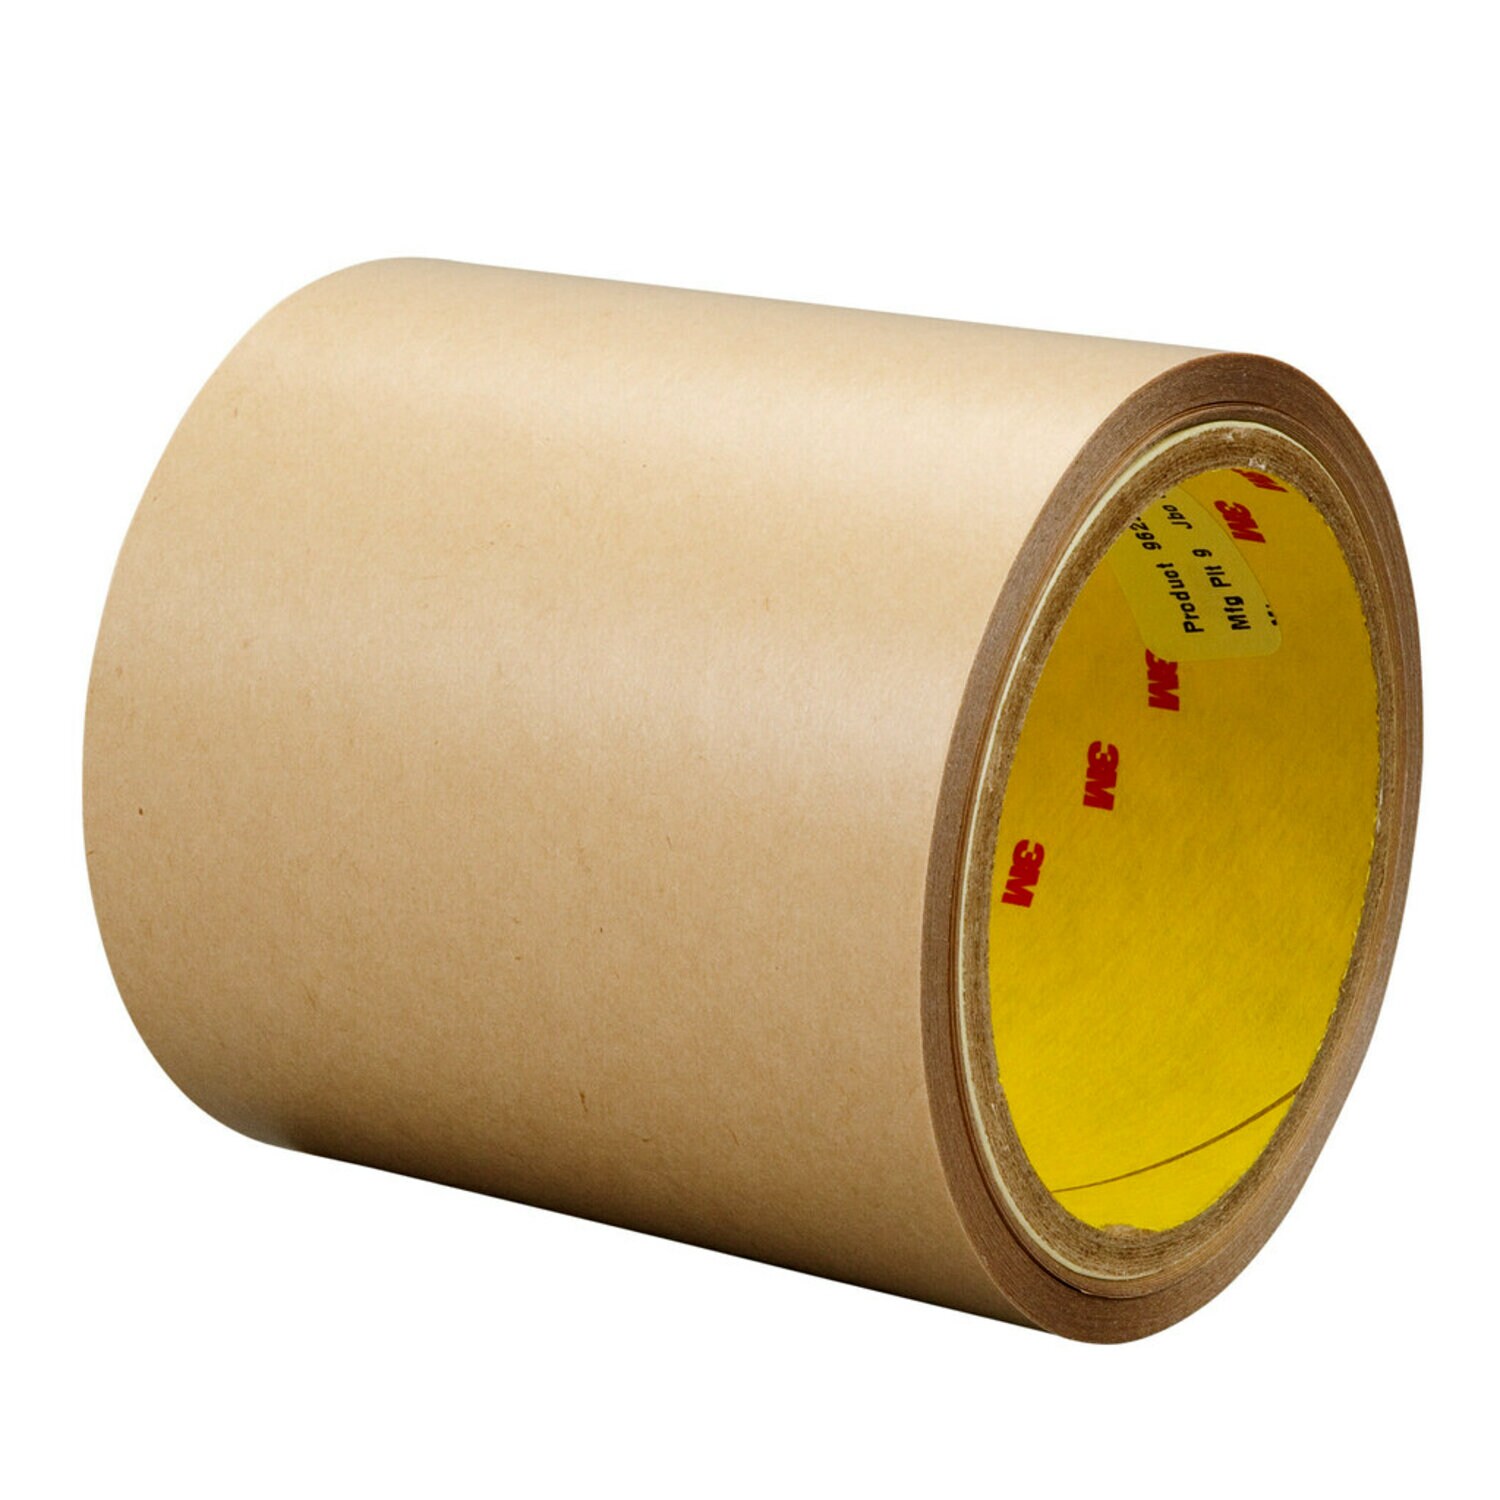 7010335510 - 3M Double Coated Tape 9629PC, Clear, 1/2 in x 60 yd, 4 mil, 72 rolls
per case